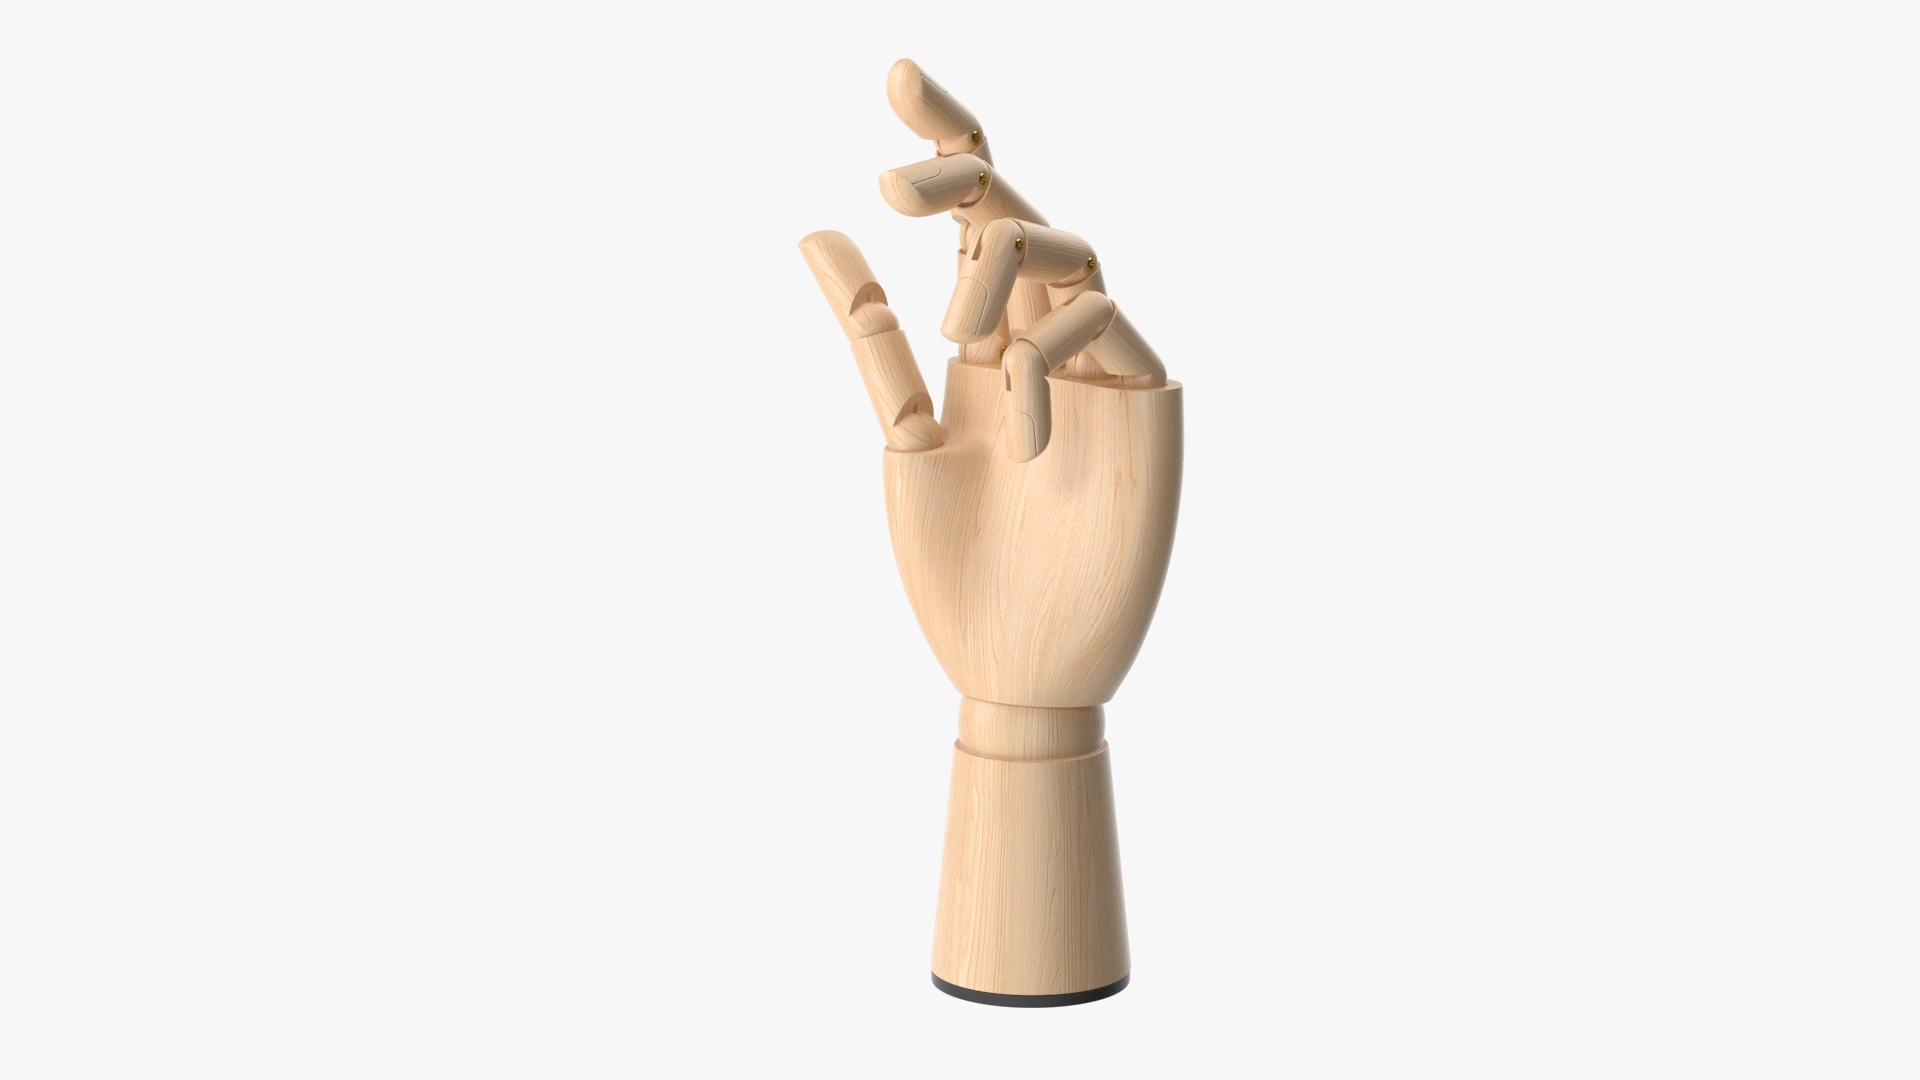 Isolated Wooden Figure Doll Posing Thinking Stock Photo 553620952 |  Shutterstock